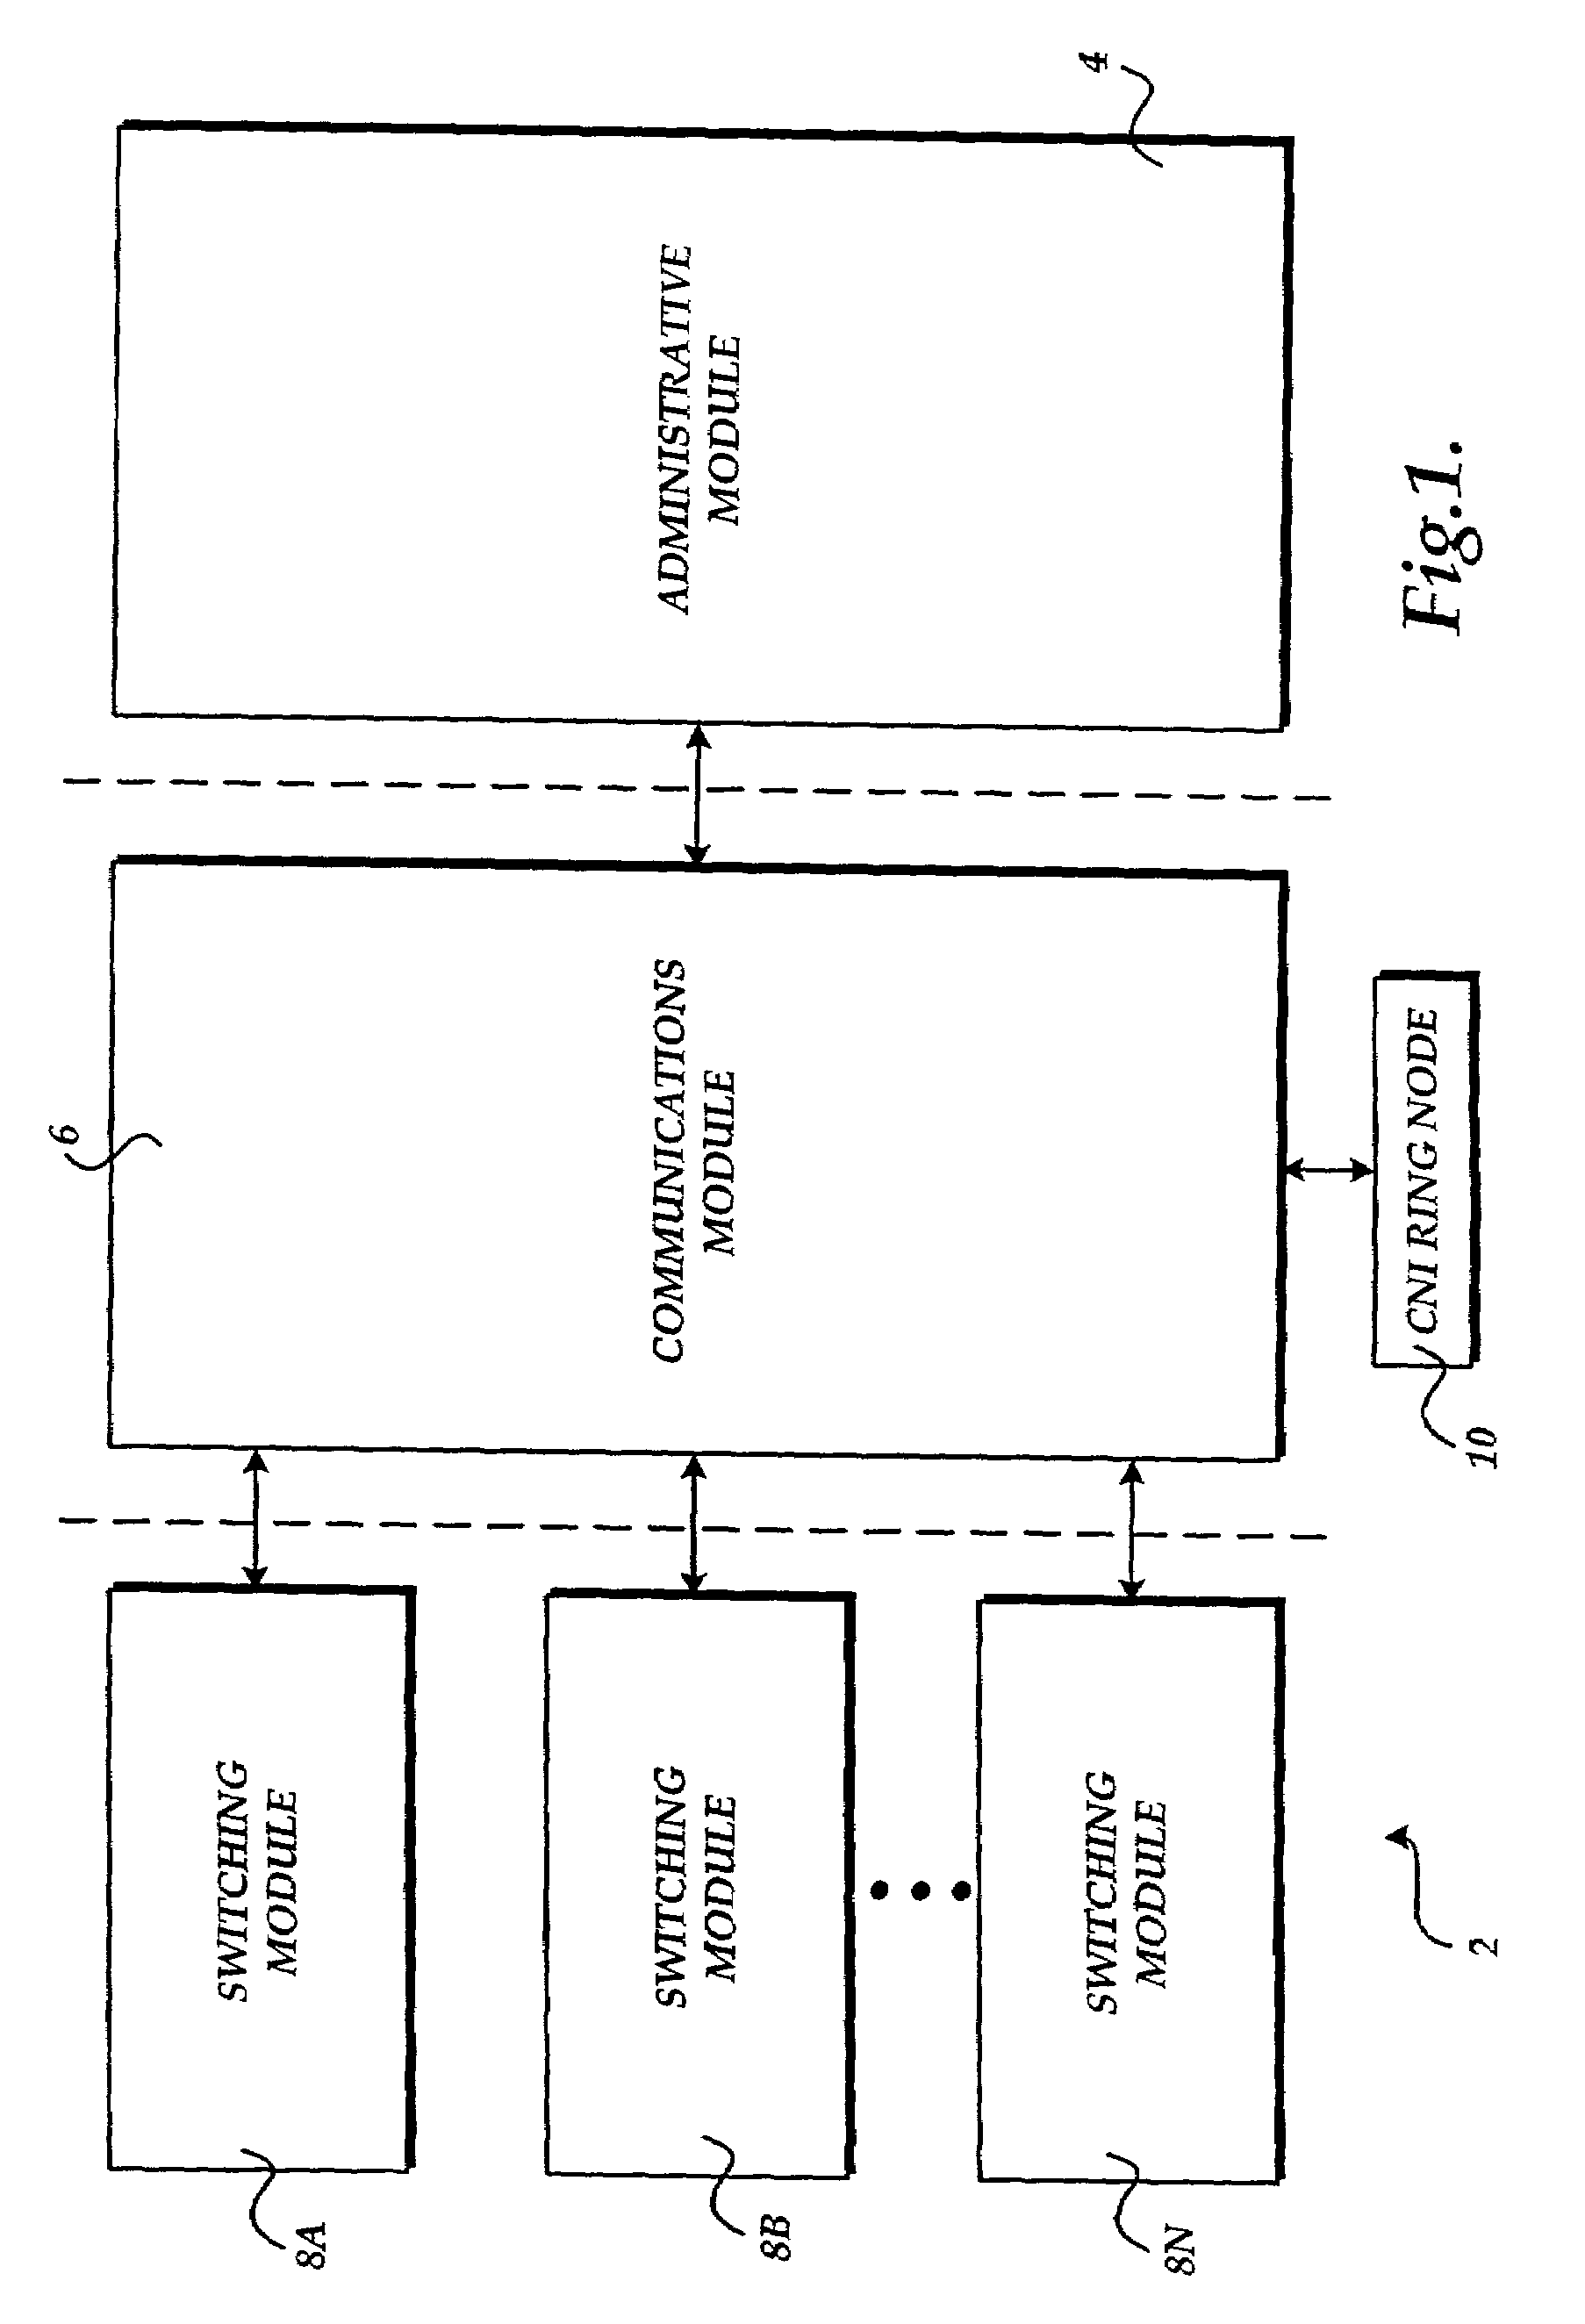 Method for configuring an upgraded administrative module computer in an electronic switching system